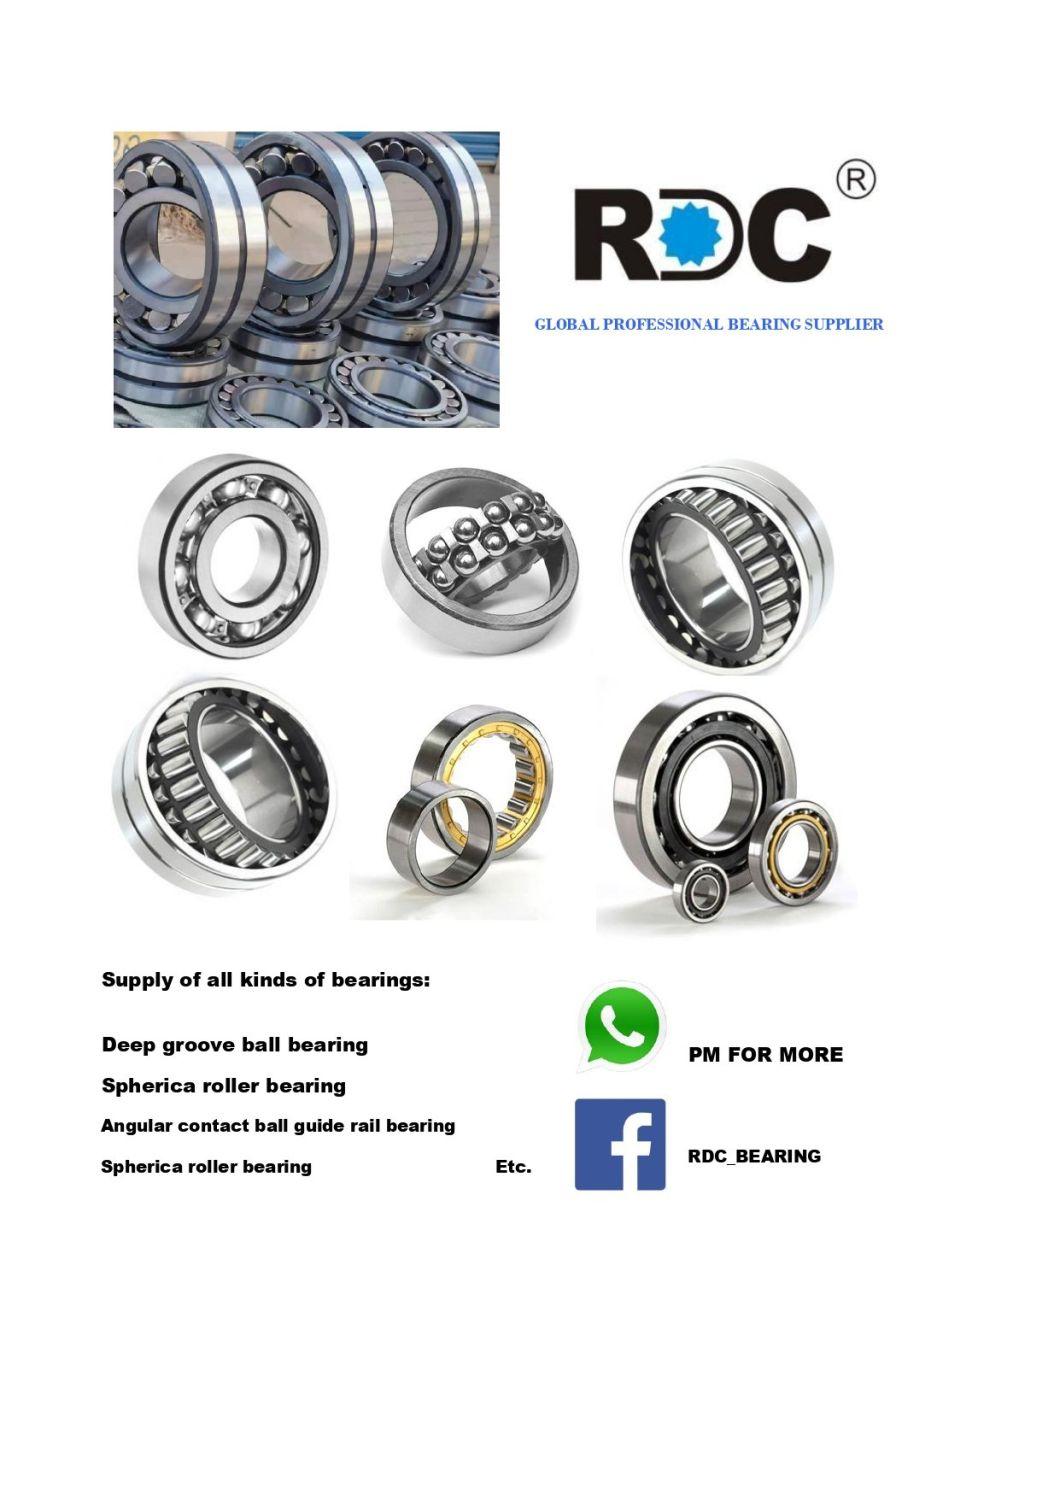 Manufacturers Supply Taper Roller Bearings Bearings 32308 with 40*90*33mm